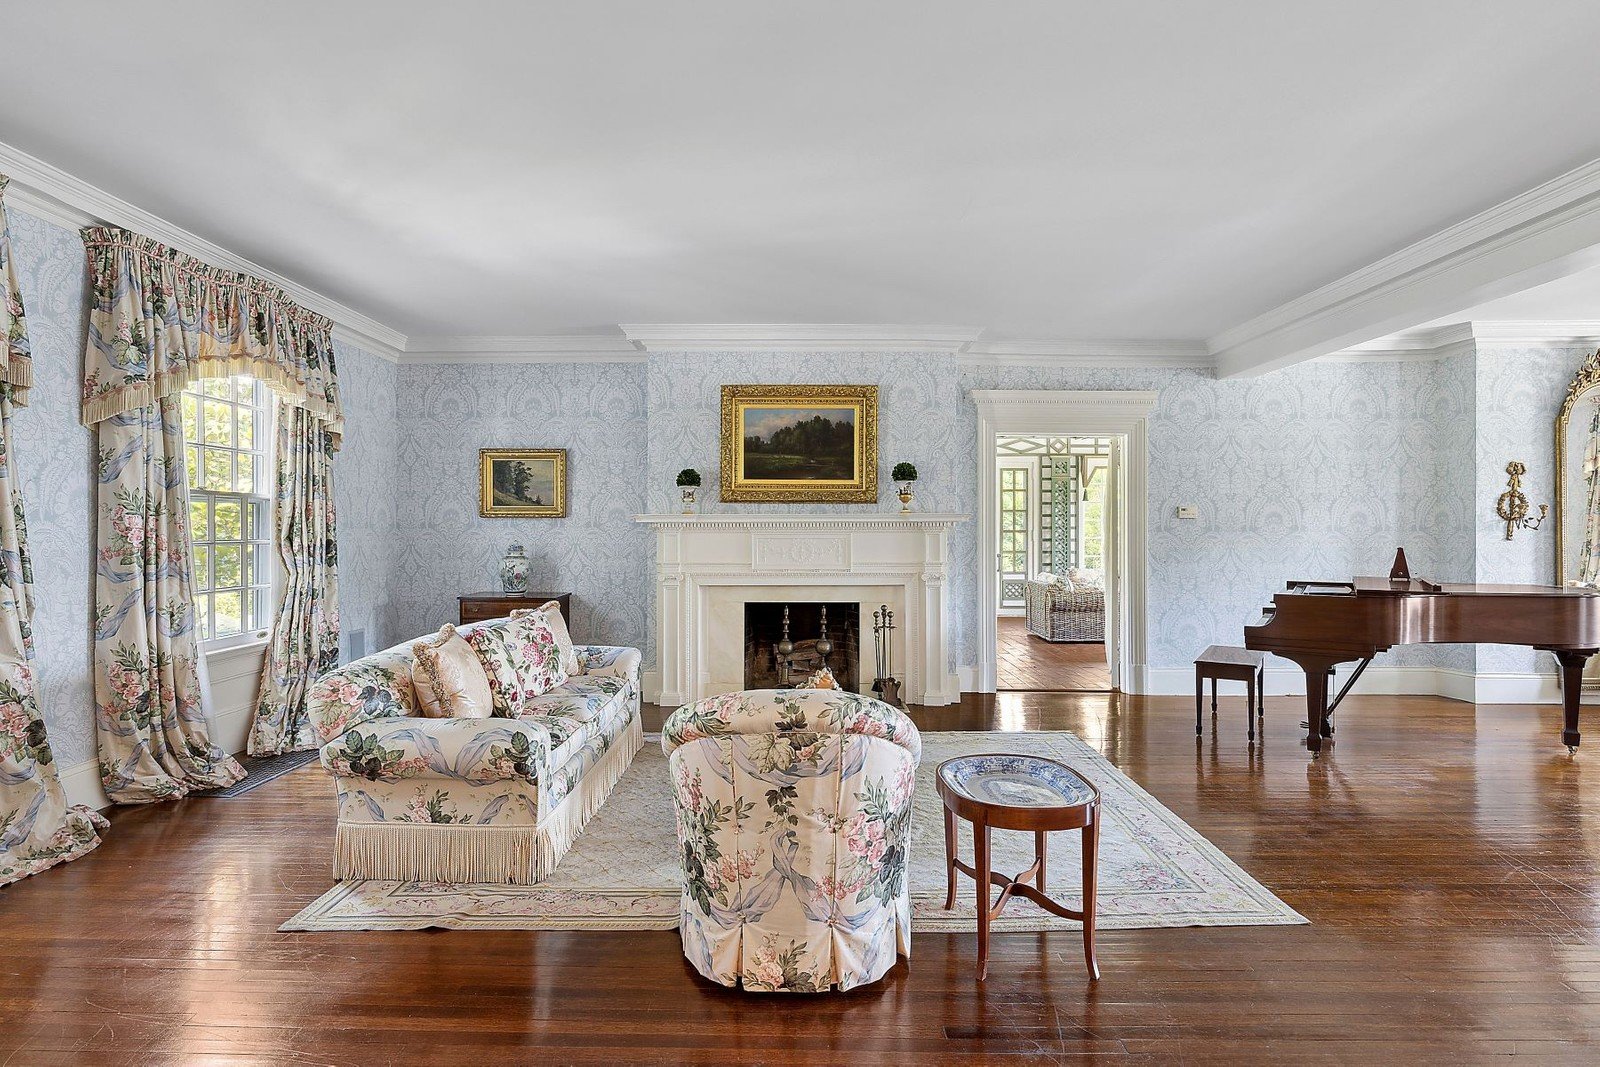 Francis York Daniel Gale Sothebys The Lindens Timeless Long Island Estate Once Home to the Famed Bootleggers, the Vanderbilts, and Rockstars 3.jpeg